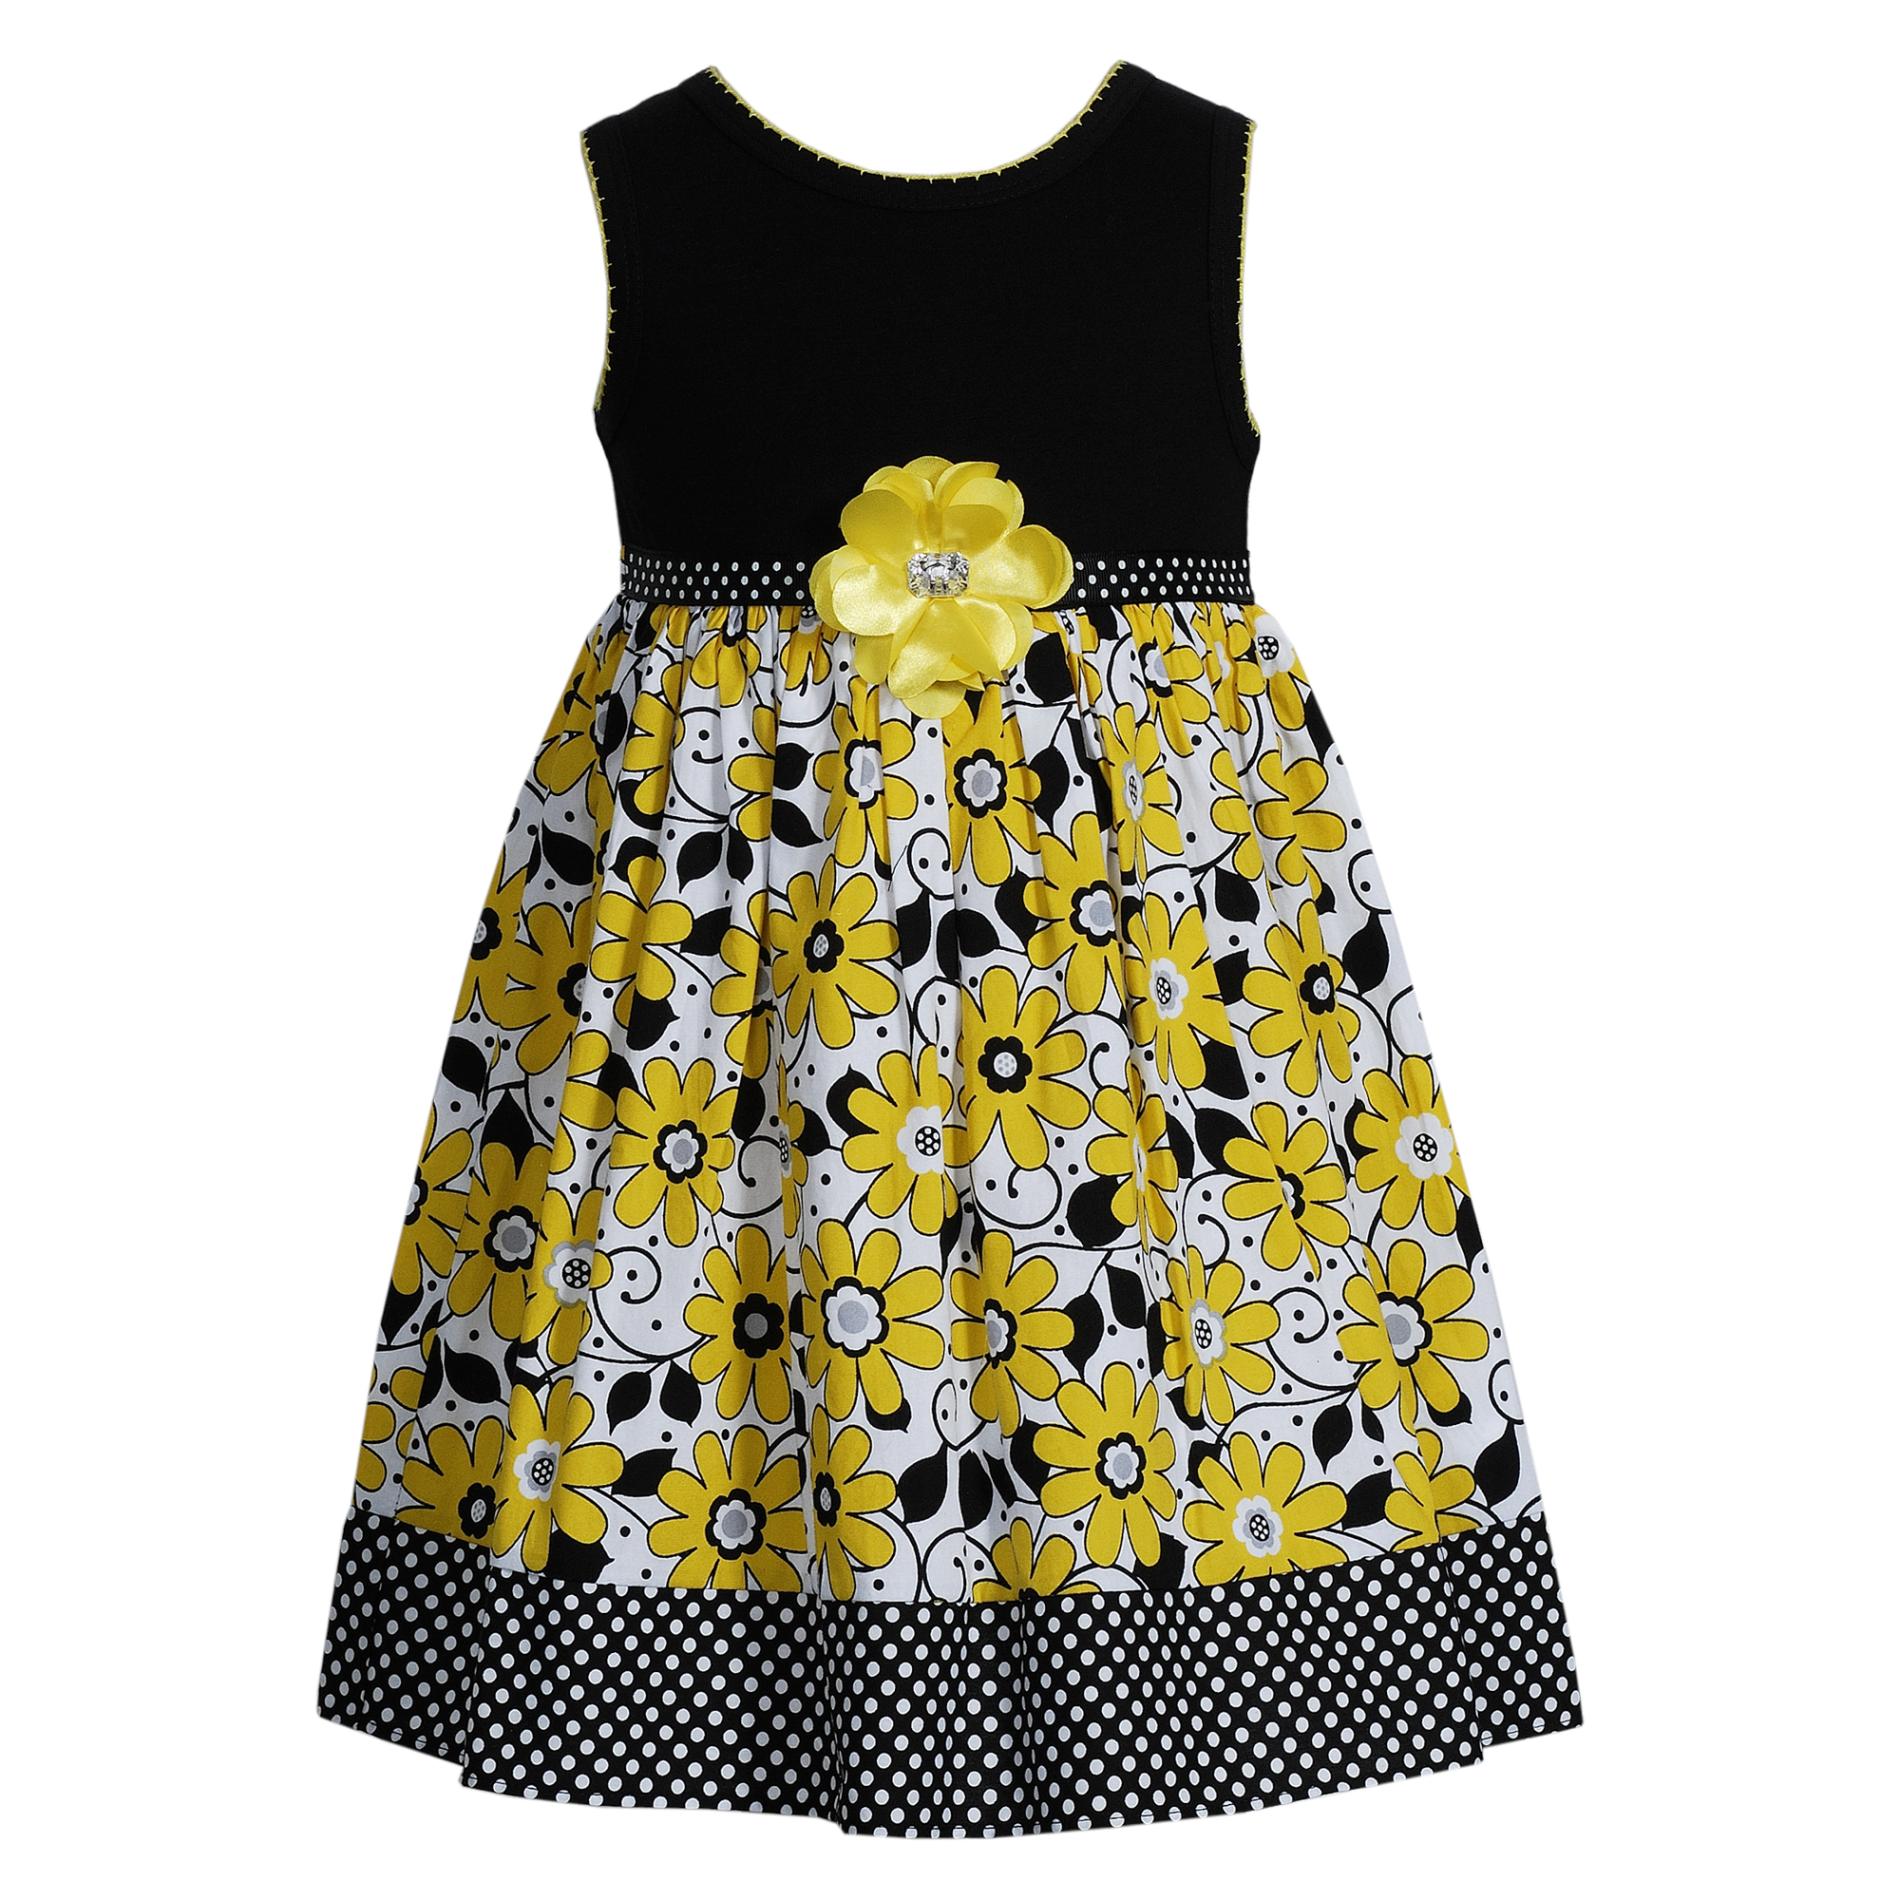 Youngland Infant & Toddler Girl's Sleeveless Dress - Floral & Polka Dots